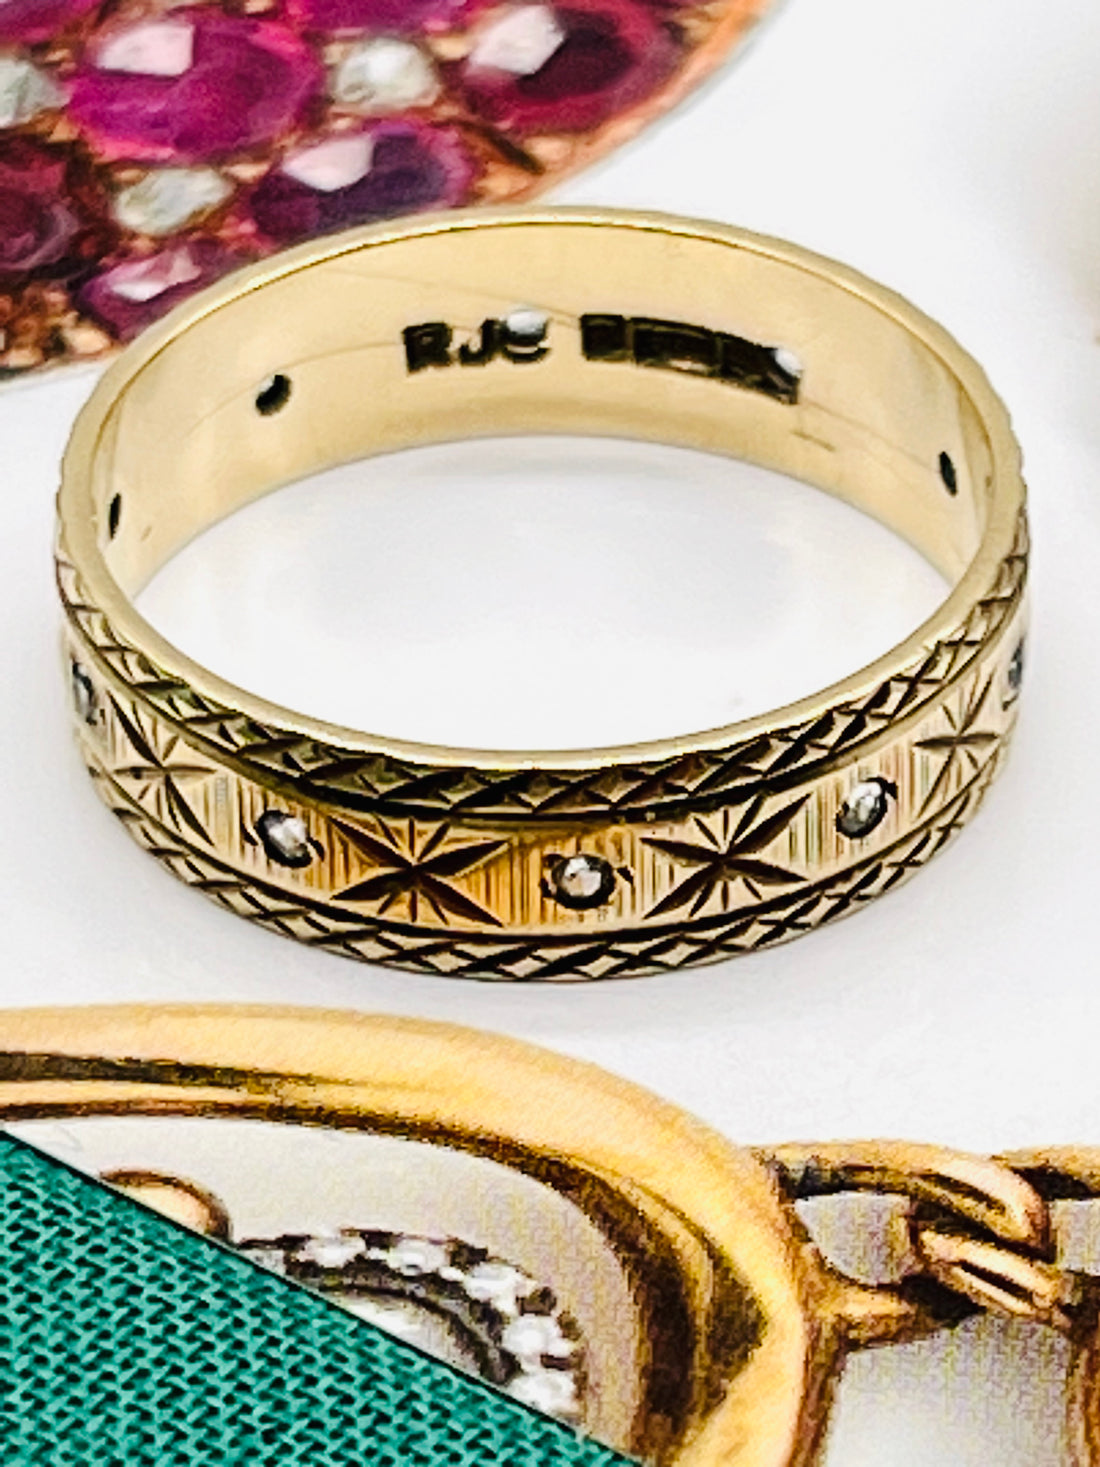 Vintage Etched Gold Band with Diamonds  by hipV Modern Vintage Jewelry.